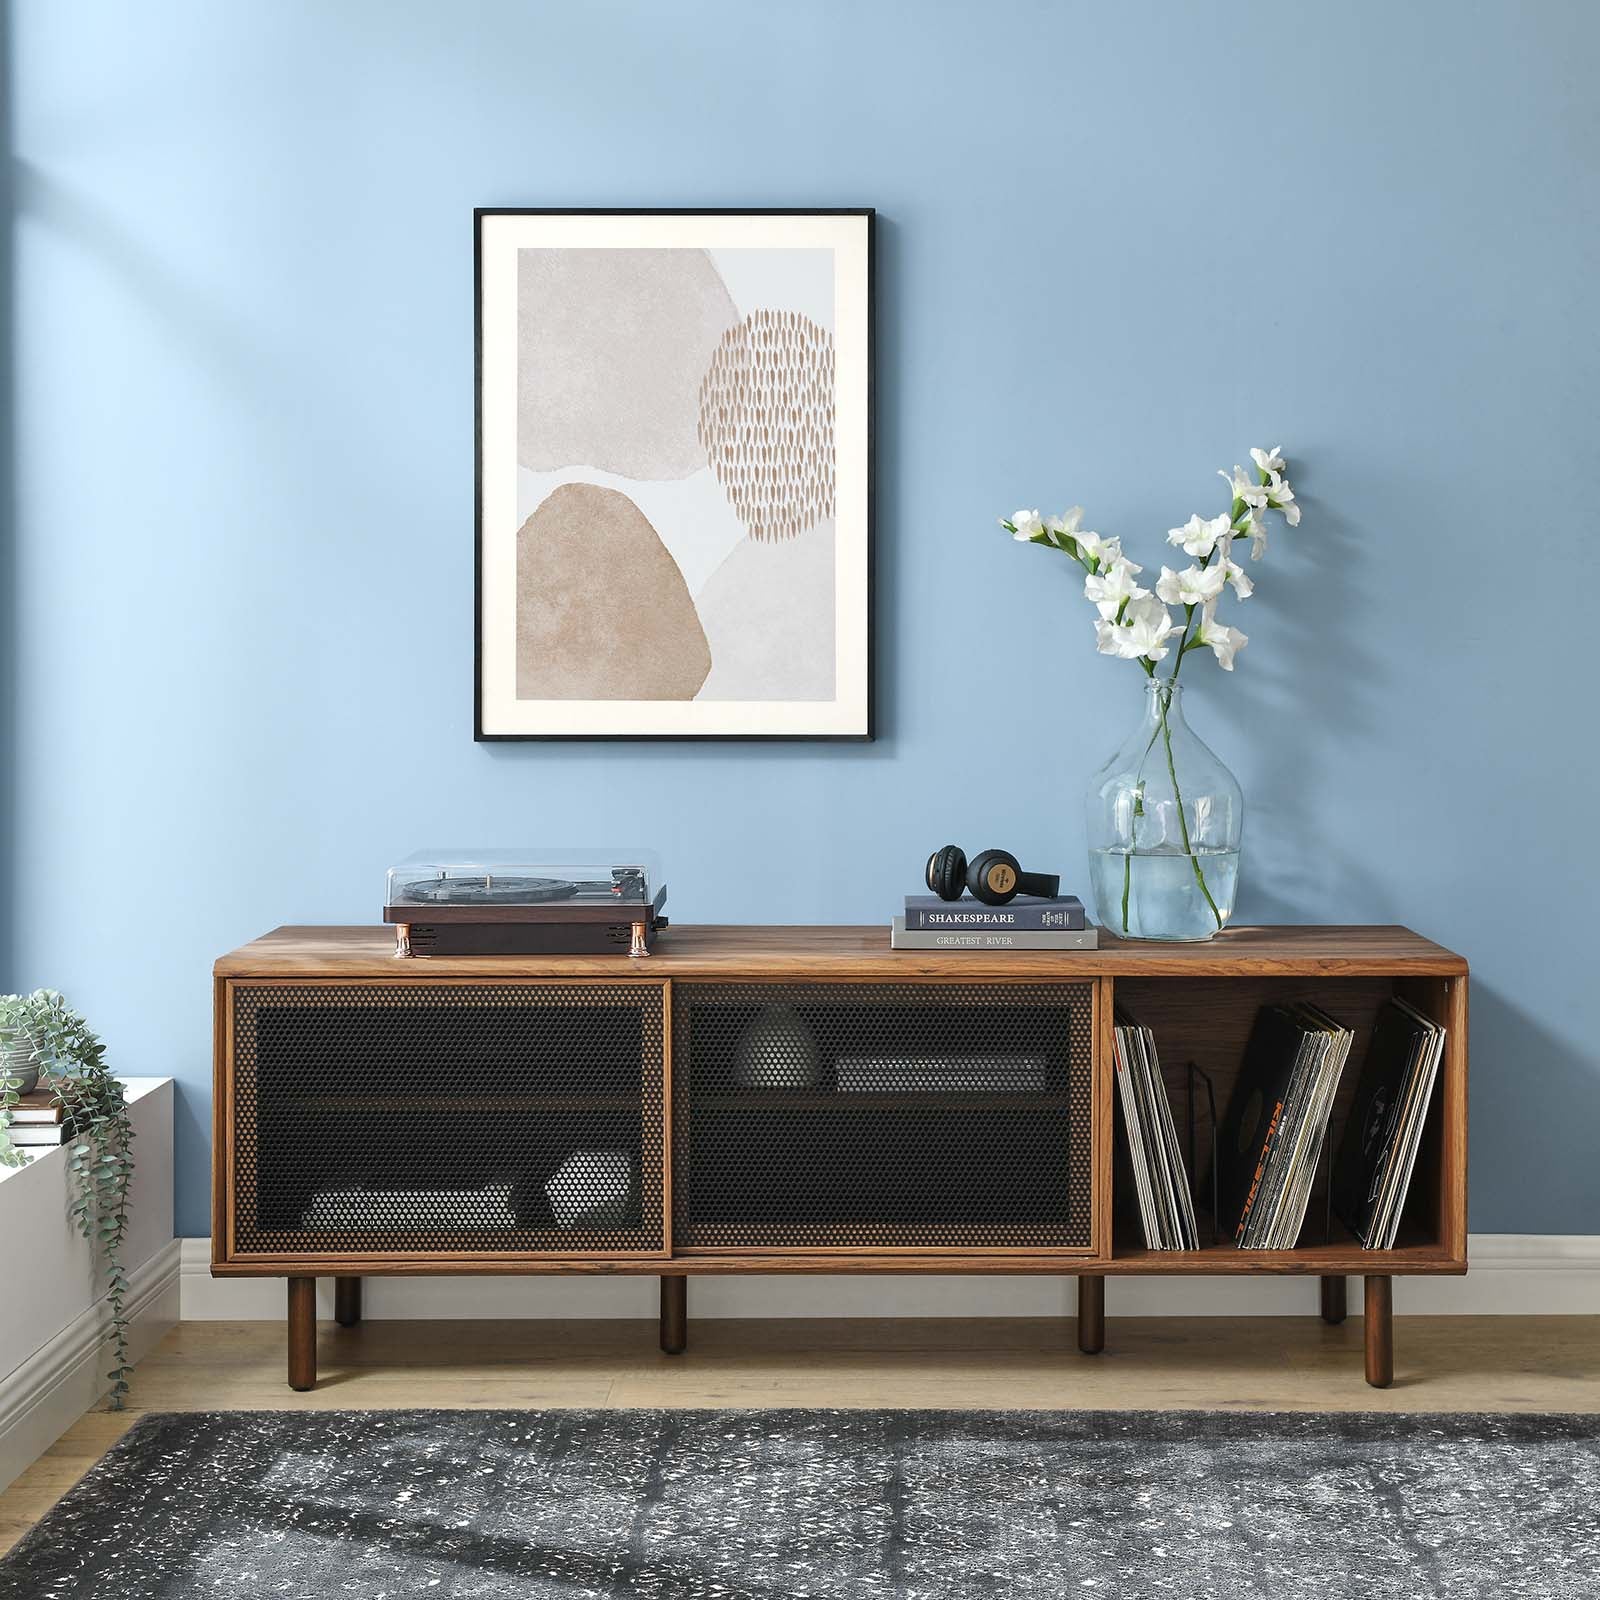 Kurtis 67" TV and Vinyl Record Stand - East Shore Modern Home Furnishings